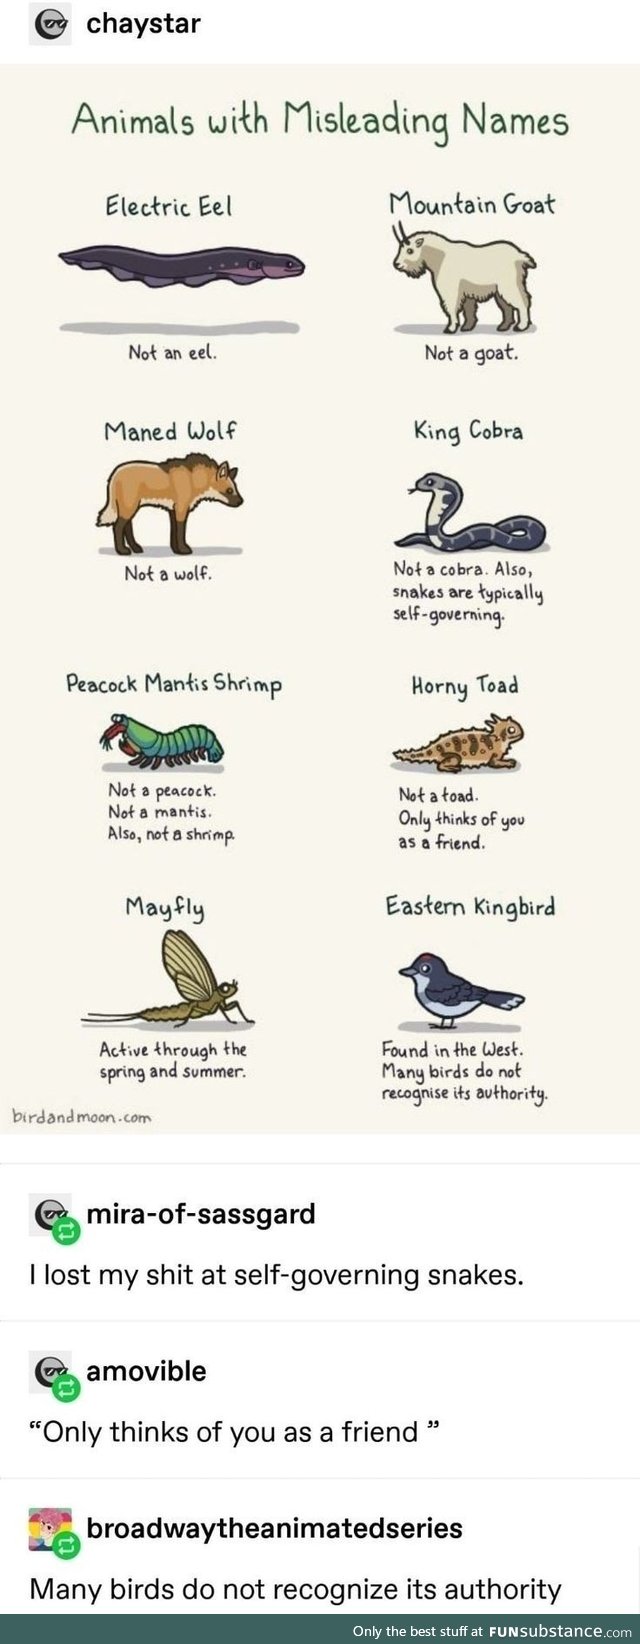 Animals with misleading names